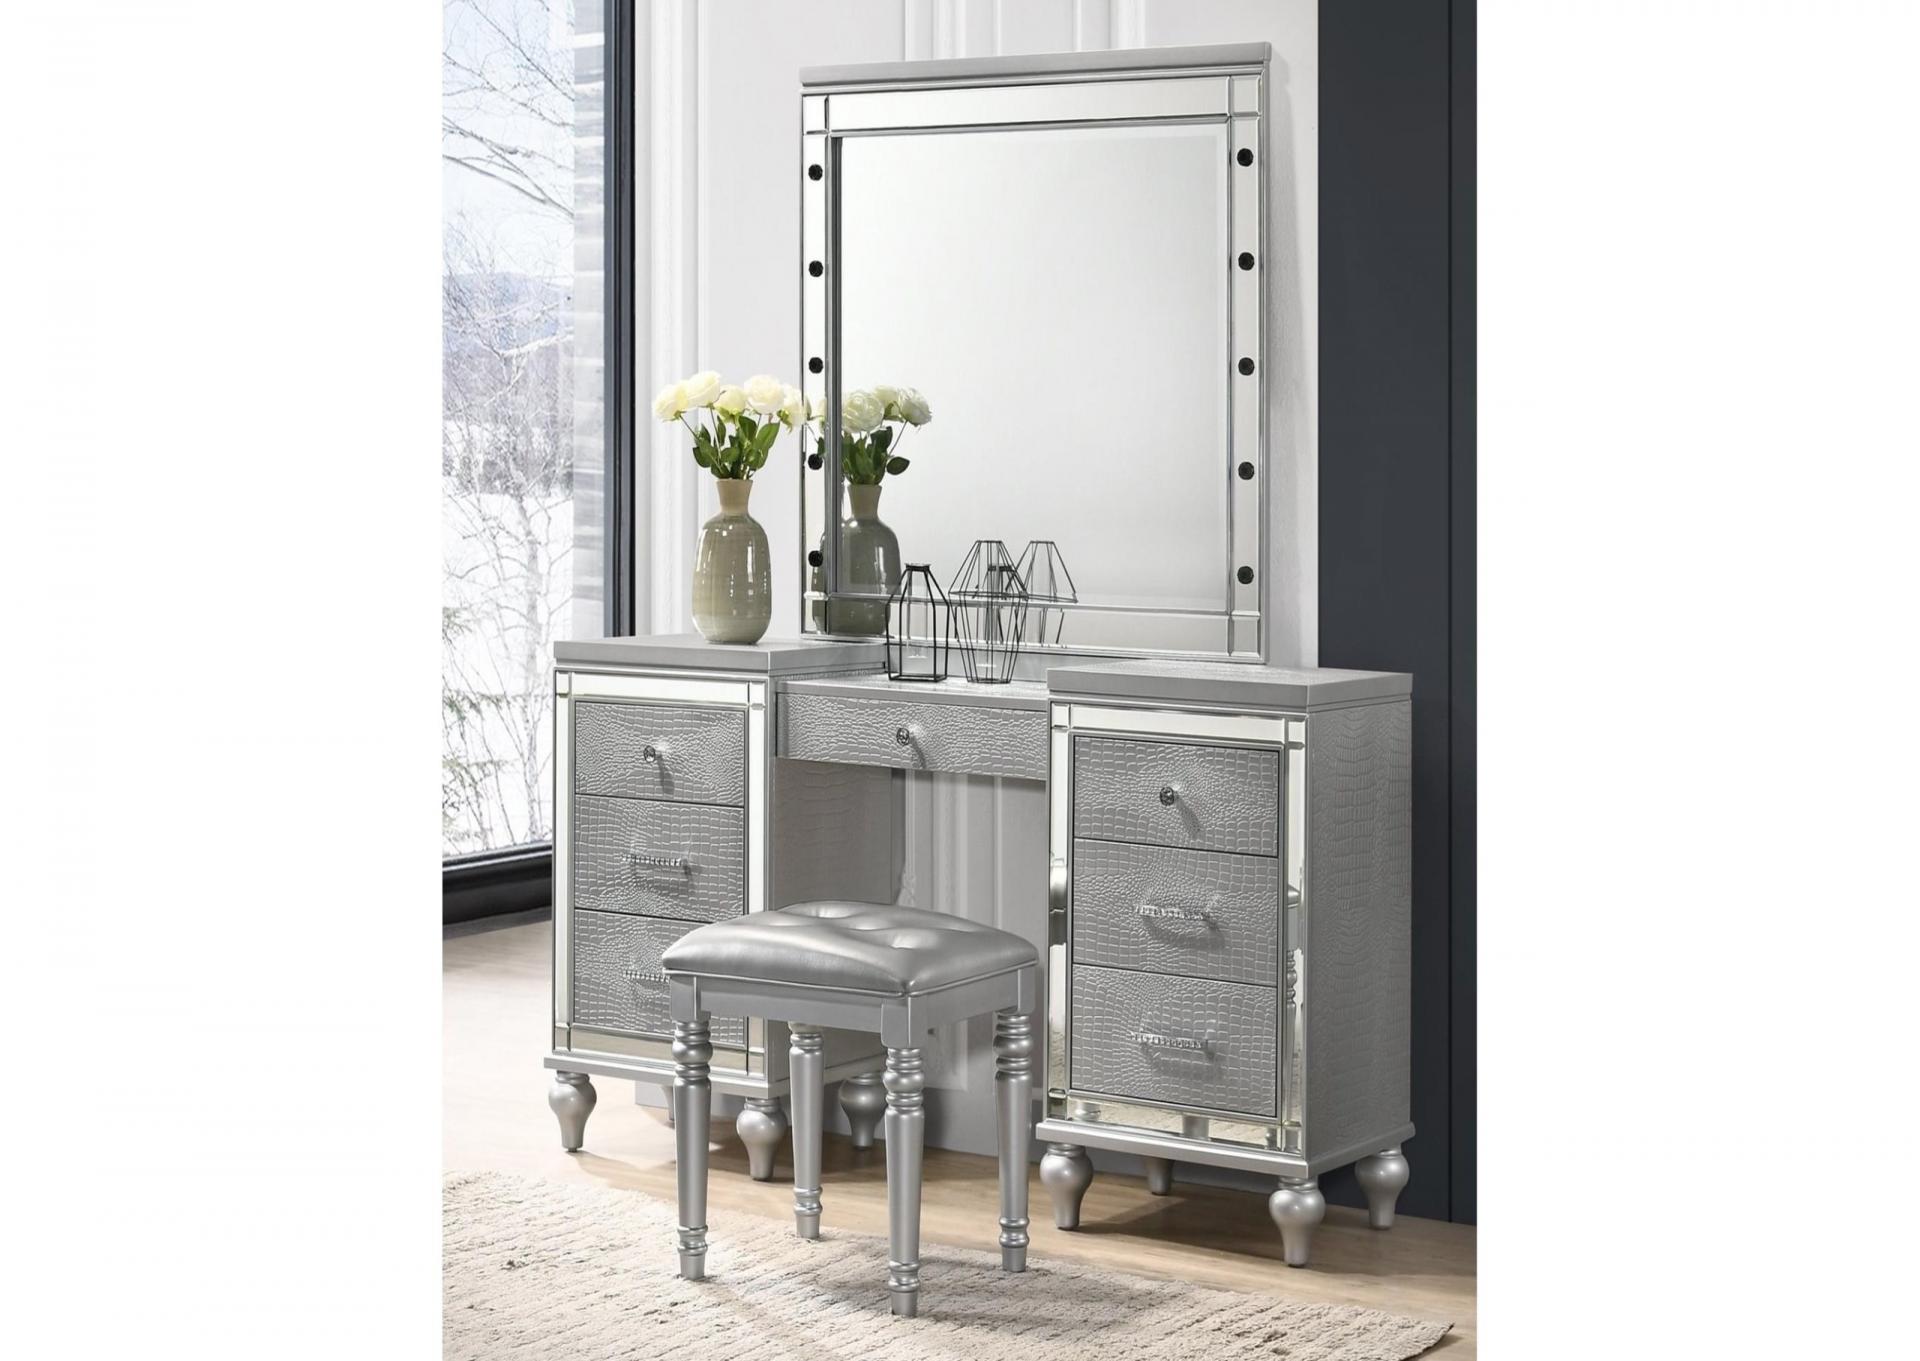 Lighted Vanity Mirror with Stool and Vanity Desk with drawers